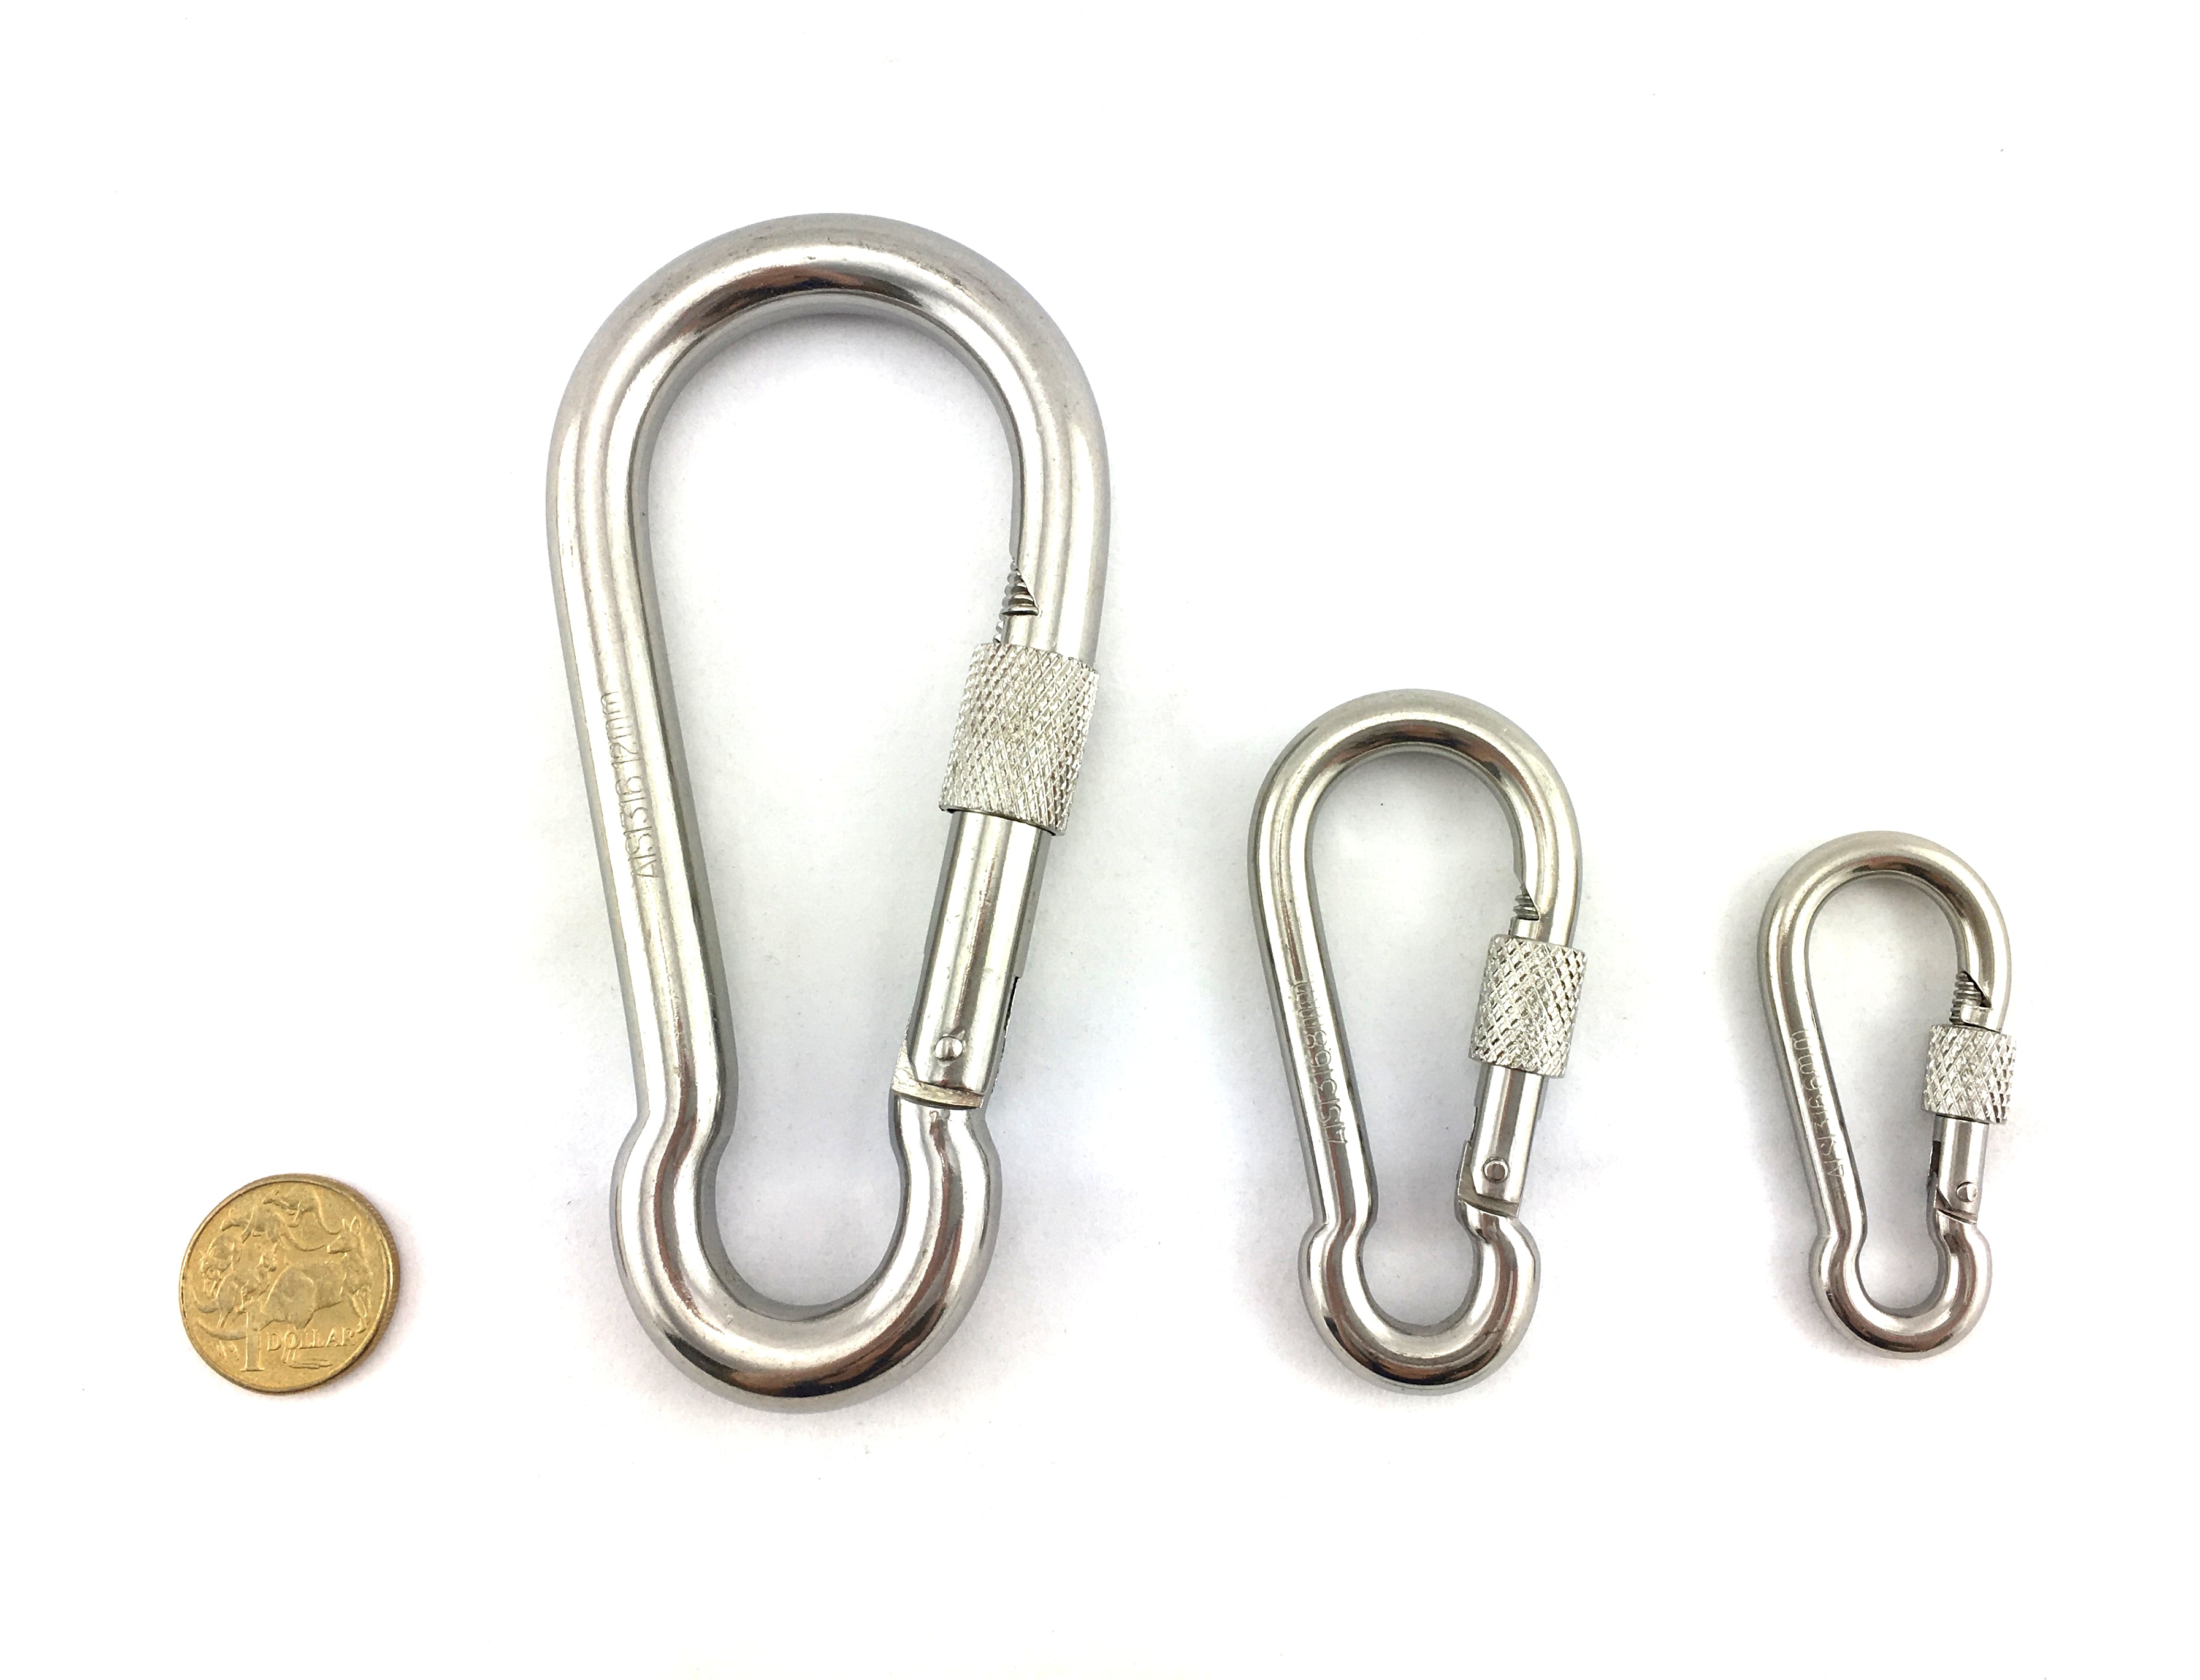 Stainless steel snap hooks with locking screw gate. Melbourne, Australia.